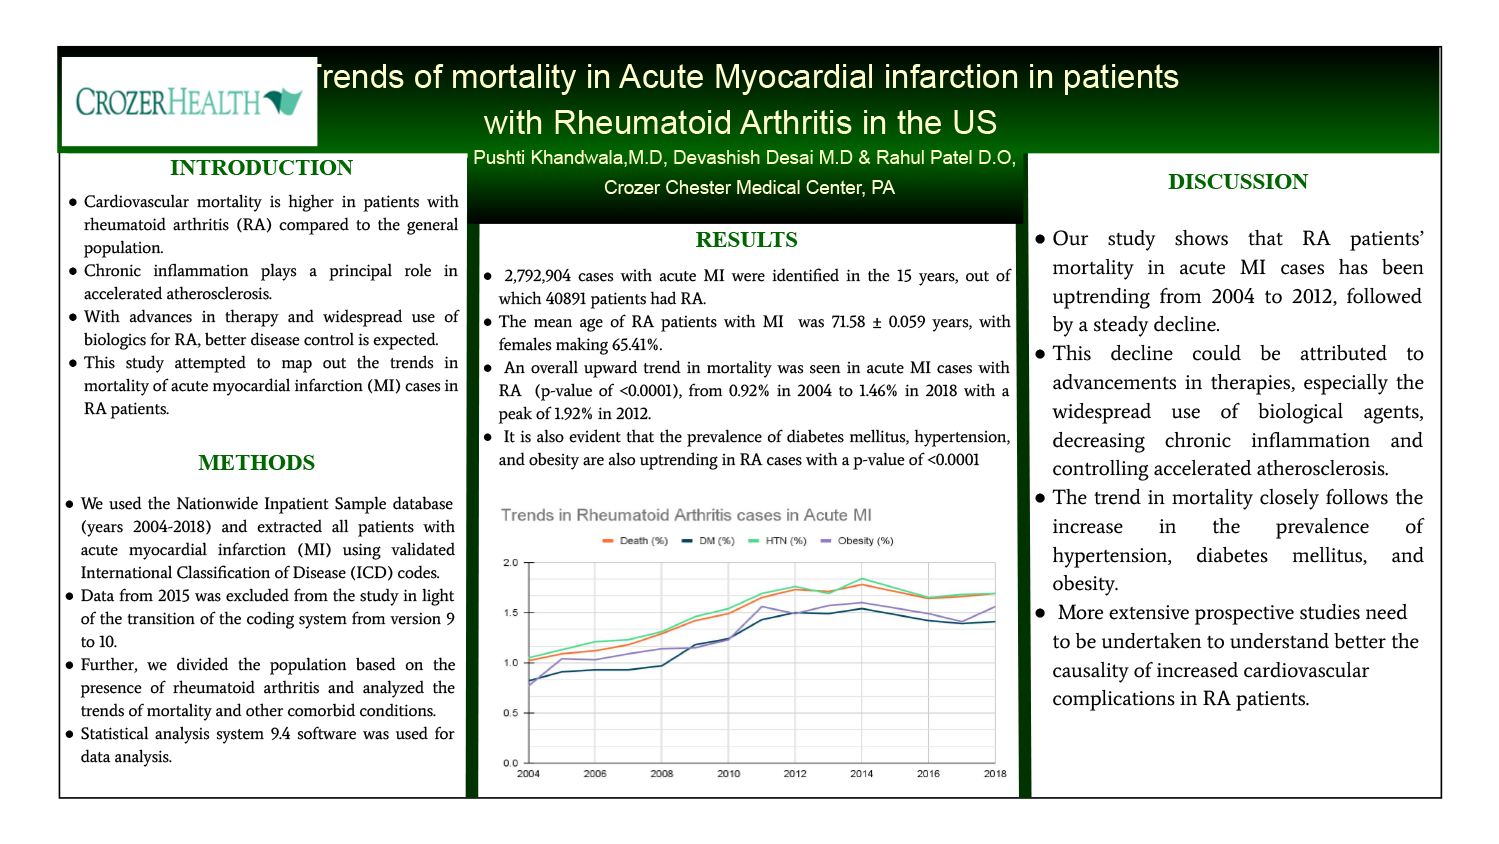 Pushti Khandwala - PAS-81-Trends-of-mortality-in-Acute-Myocardial-Infarction-in-patients-with-Rheumatoid-Arthritis-in-the-US